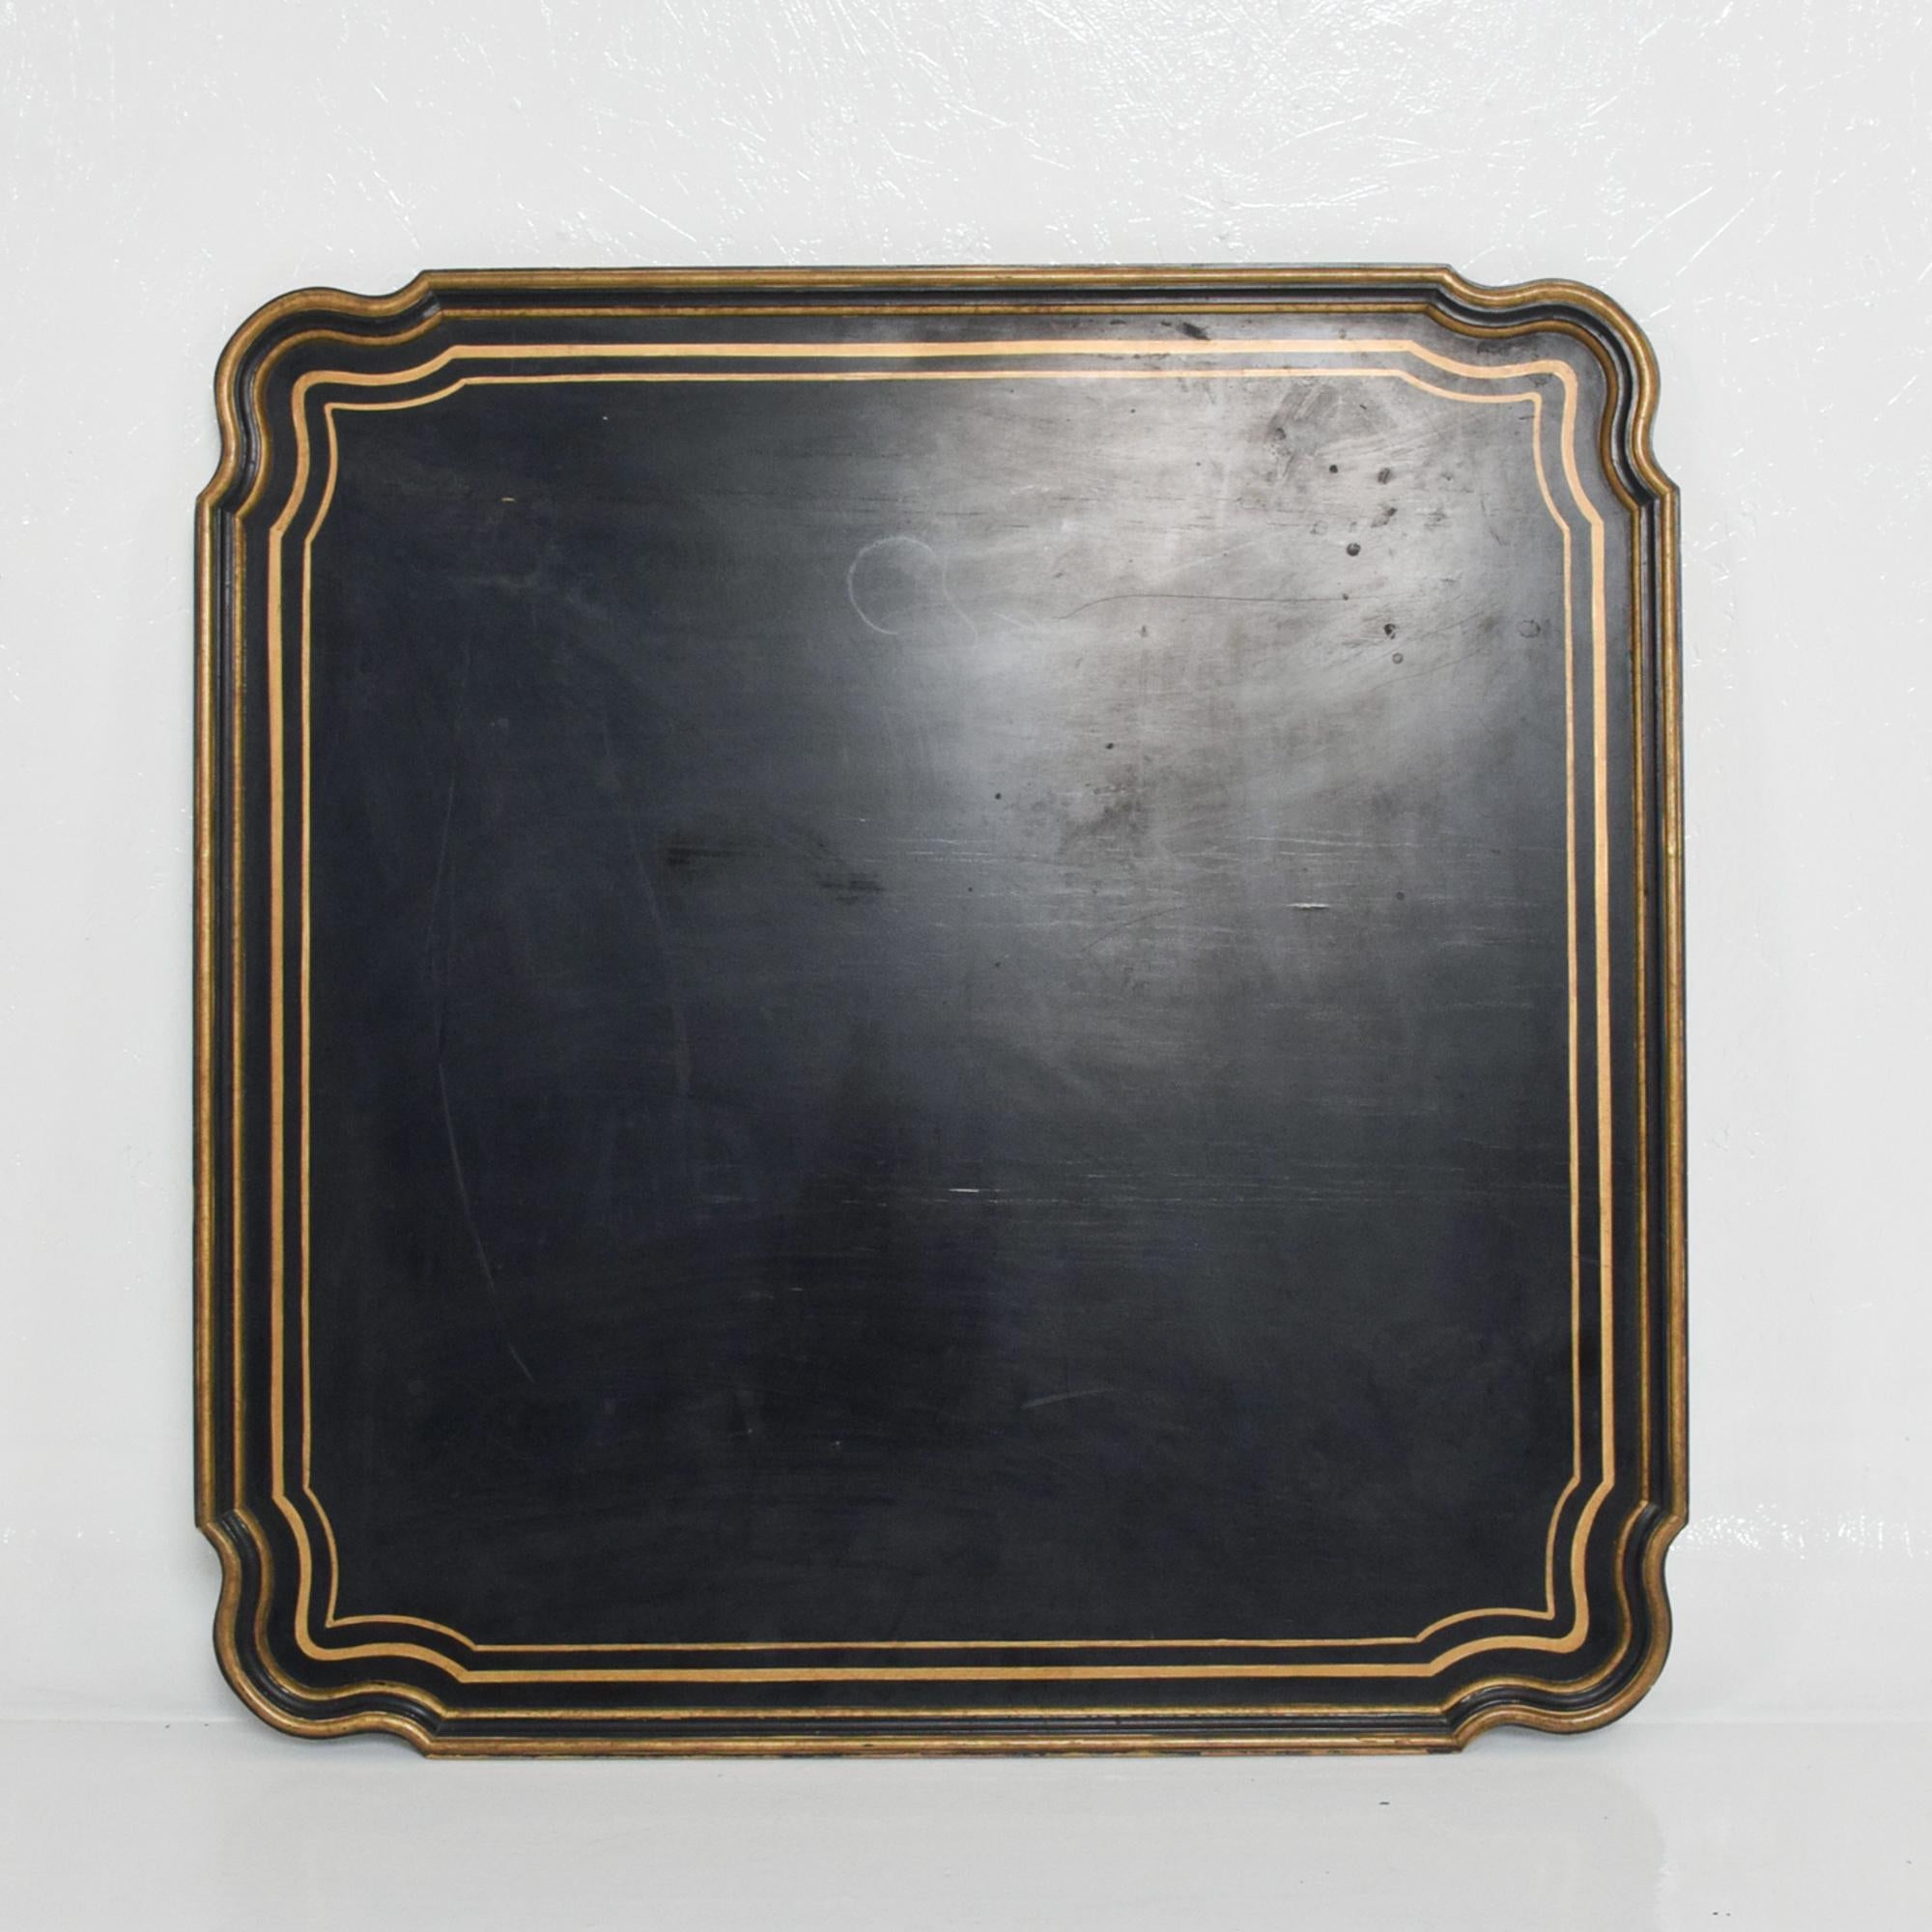 Style Dorothy Draper Hollywood Regency Painted Black Wood Coffee Tabletop Tray Gold Scallop Trim 1950s by Baker Co. 
No base included, selling tabletop portion only.
37.75 x 37.75 x 1.38 thick.
Original vintage unrestored preowned condition. 
Refer